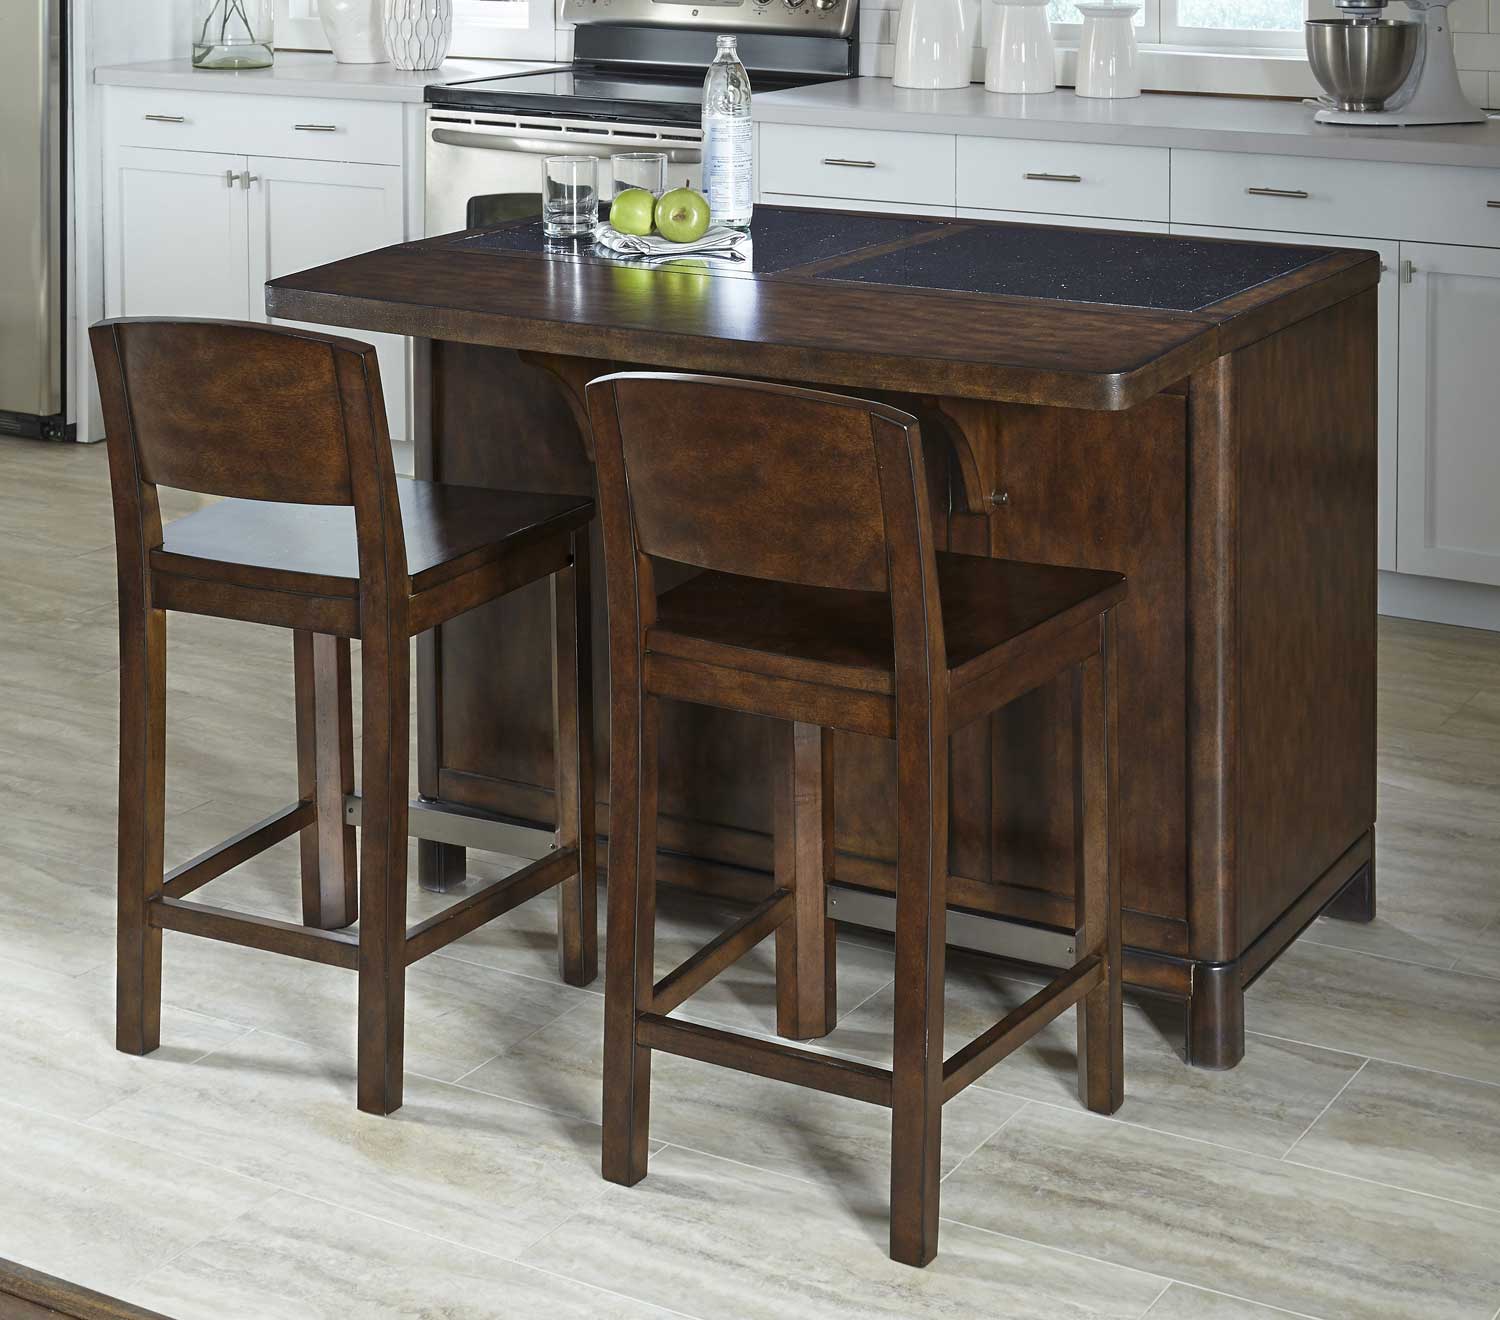 Home Styles Crescent Hill Kitchen Island with Granite Top and Two Stools - Two-tone tortoise shell